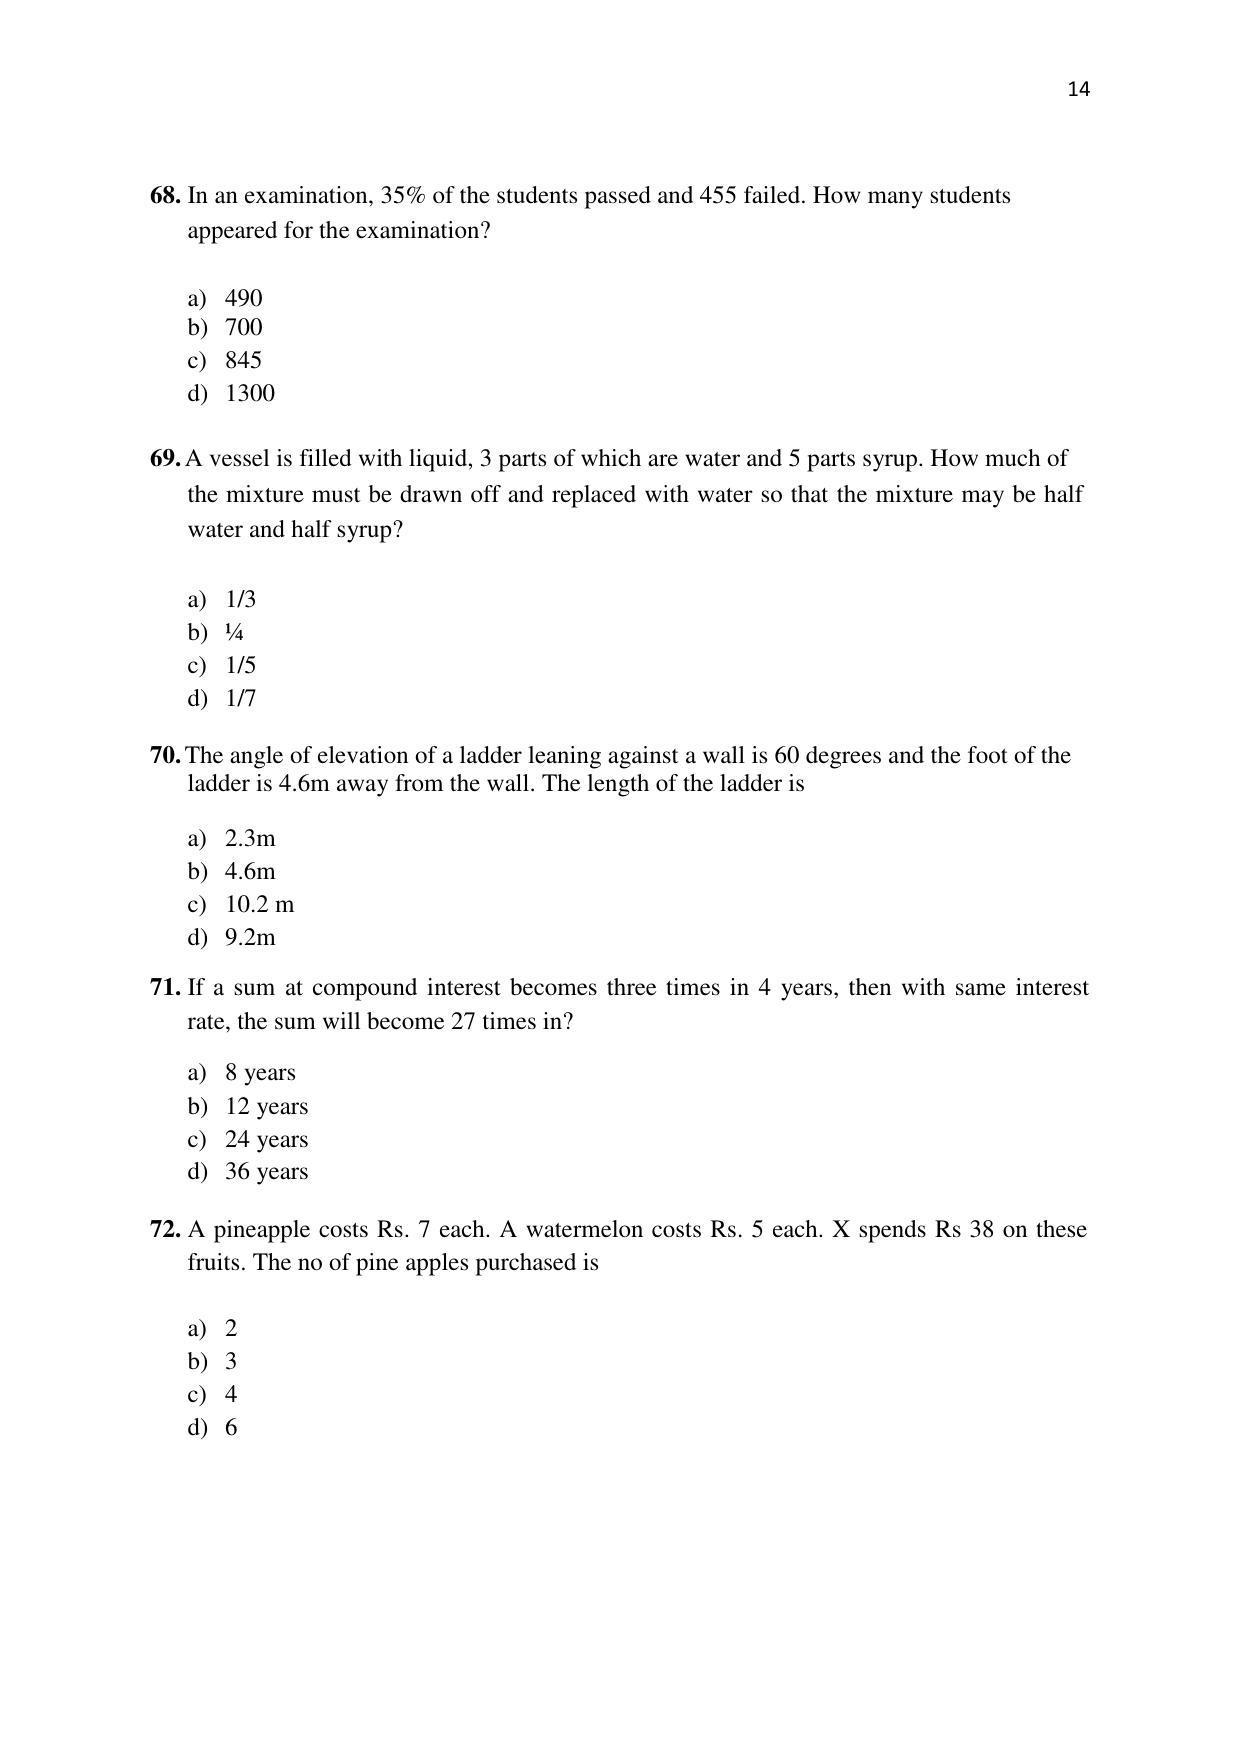 KMAT Question Papers - November 2016 - Page 14